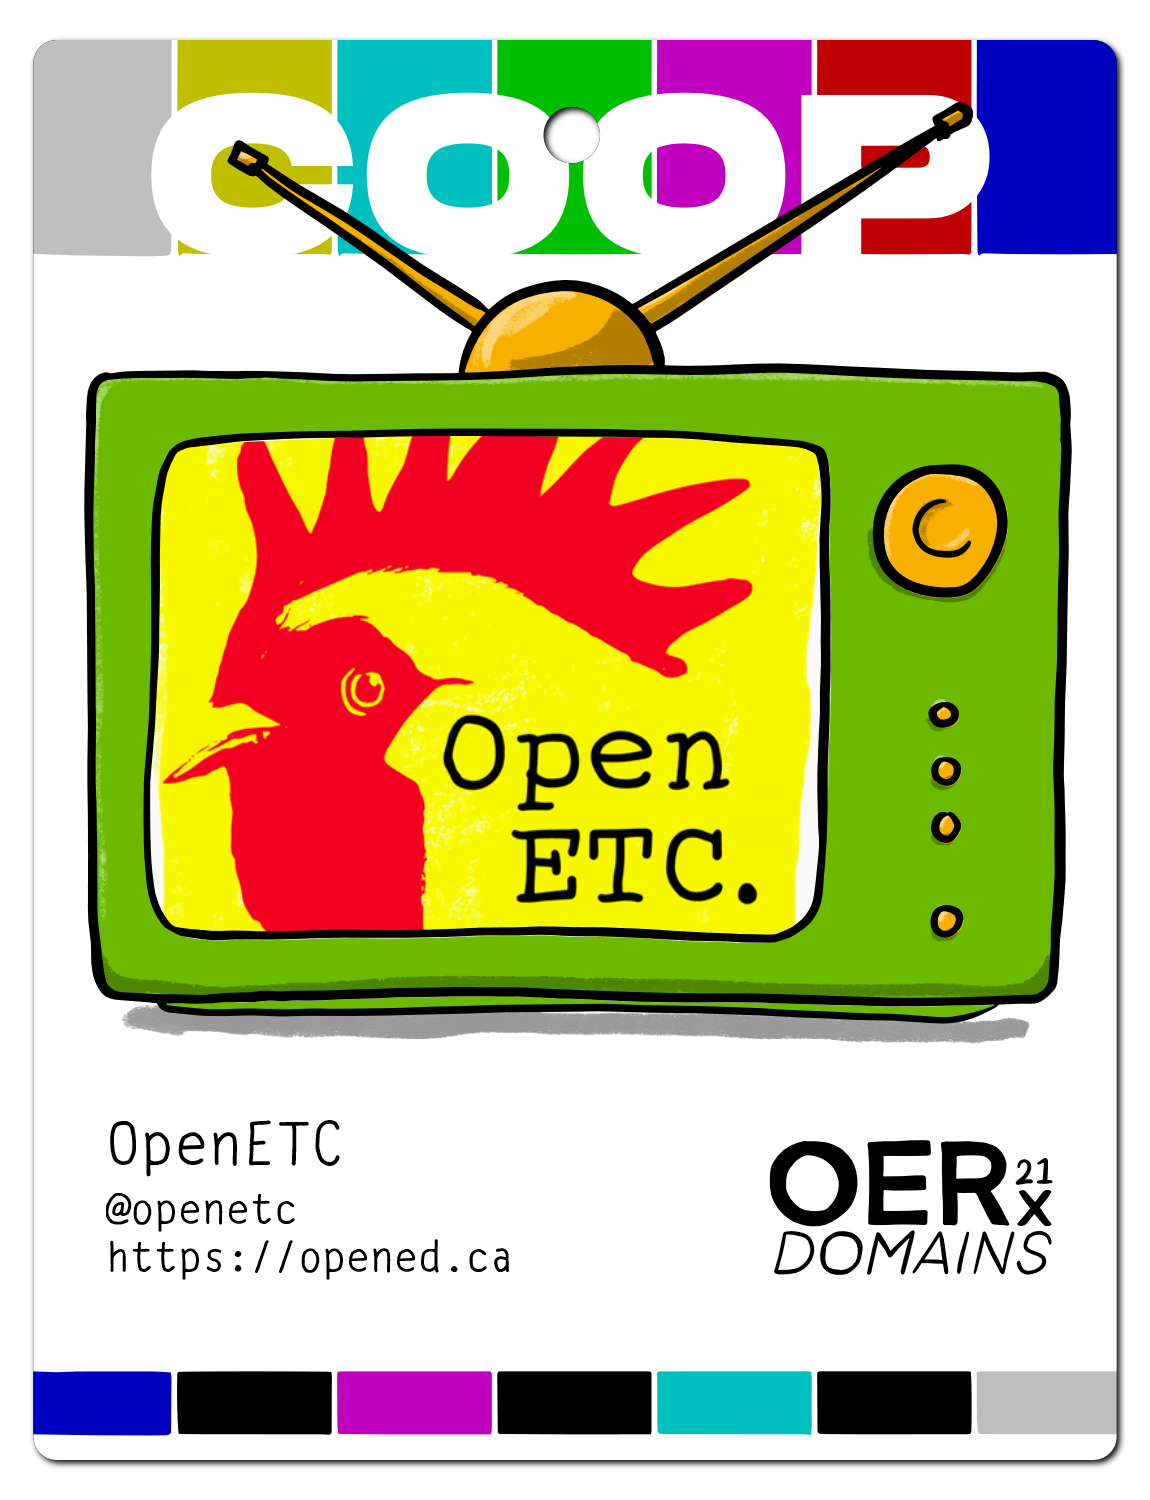 Conference badge featuring a green television with a yellow and red cartoonish chicken head